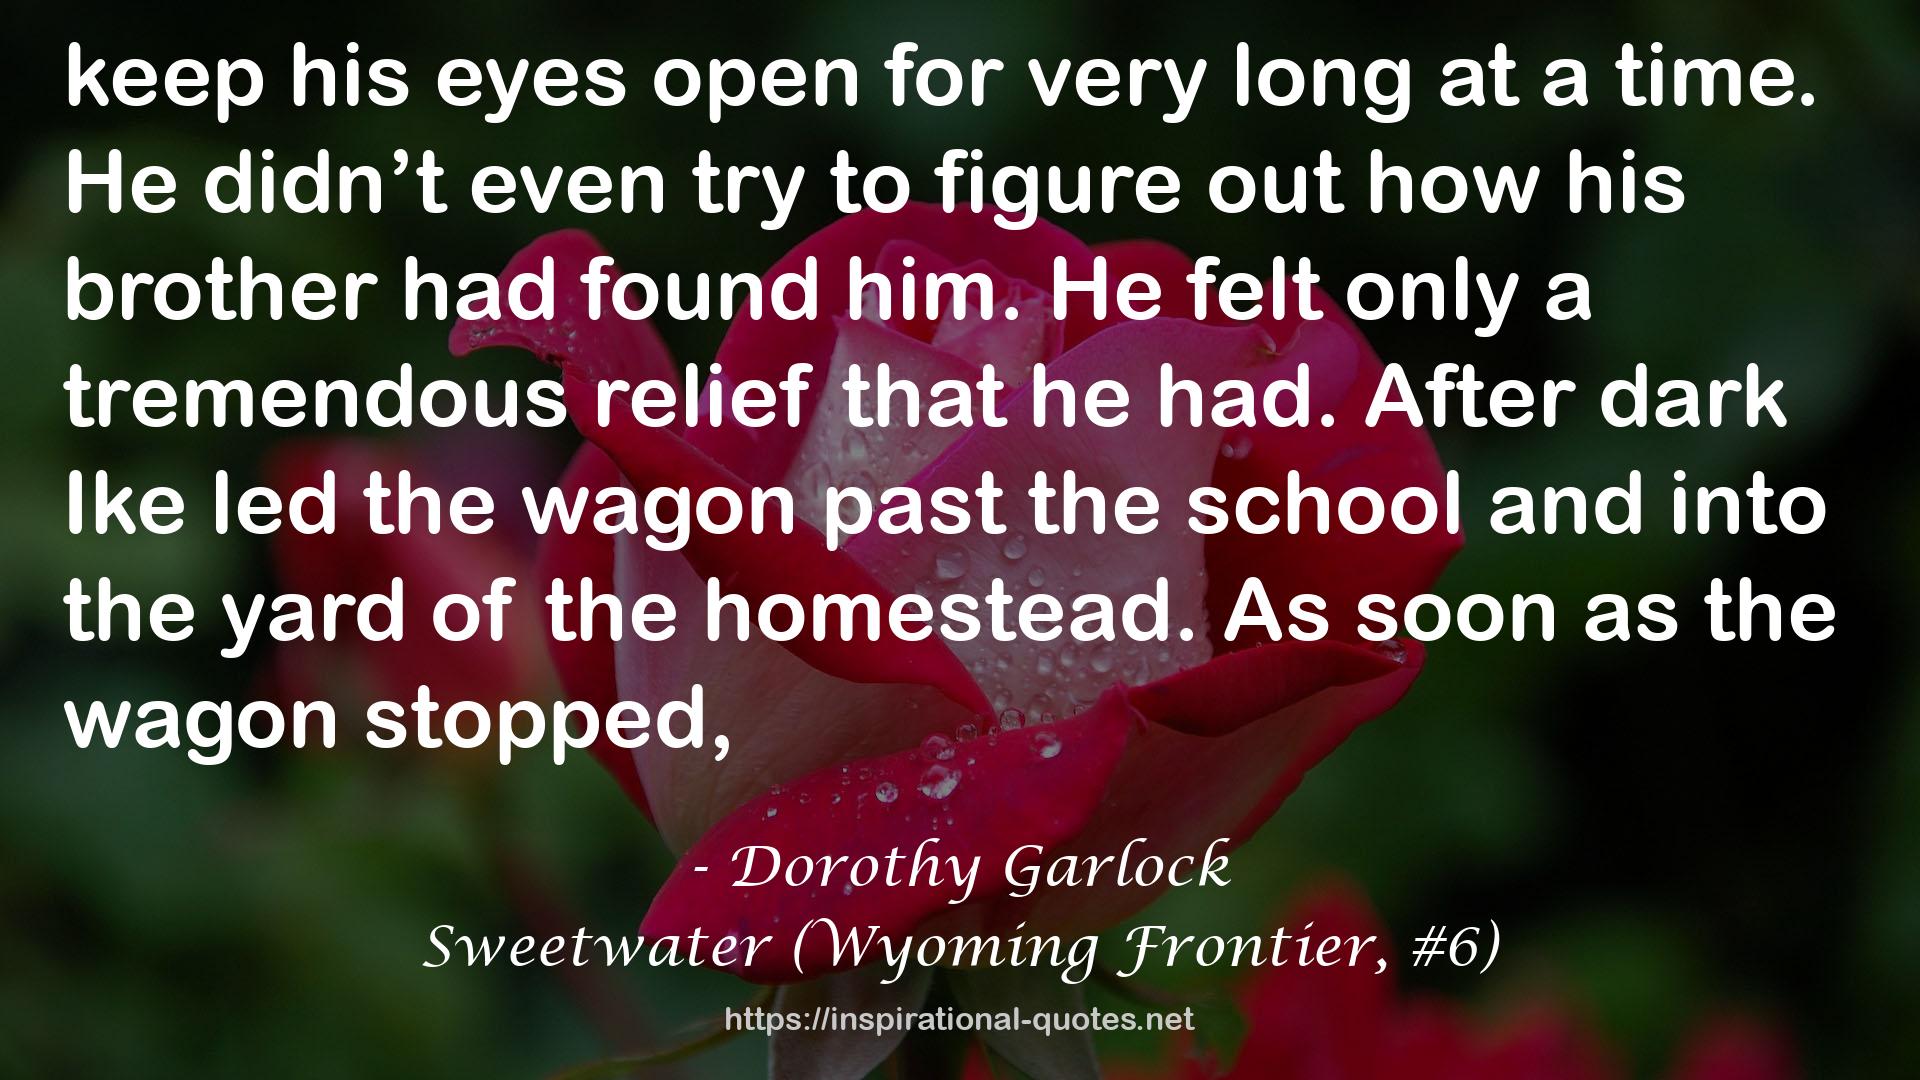 Sweetwater (Wyoming Frontier, #6) QUOTES